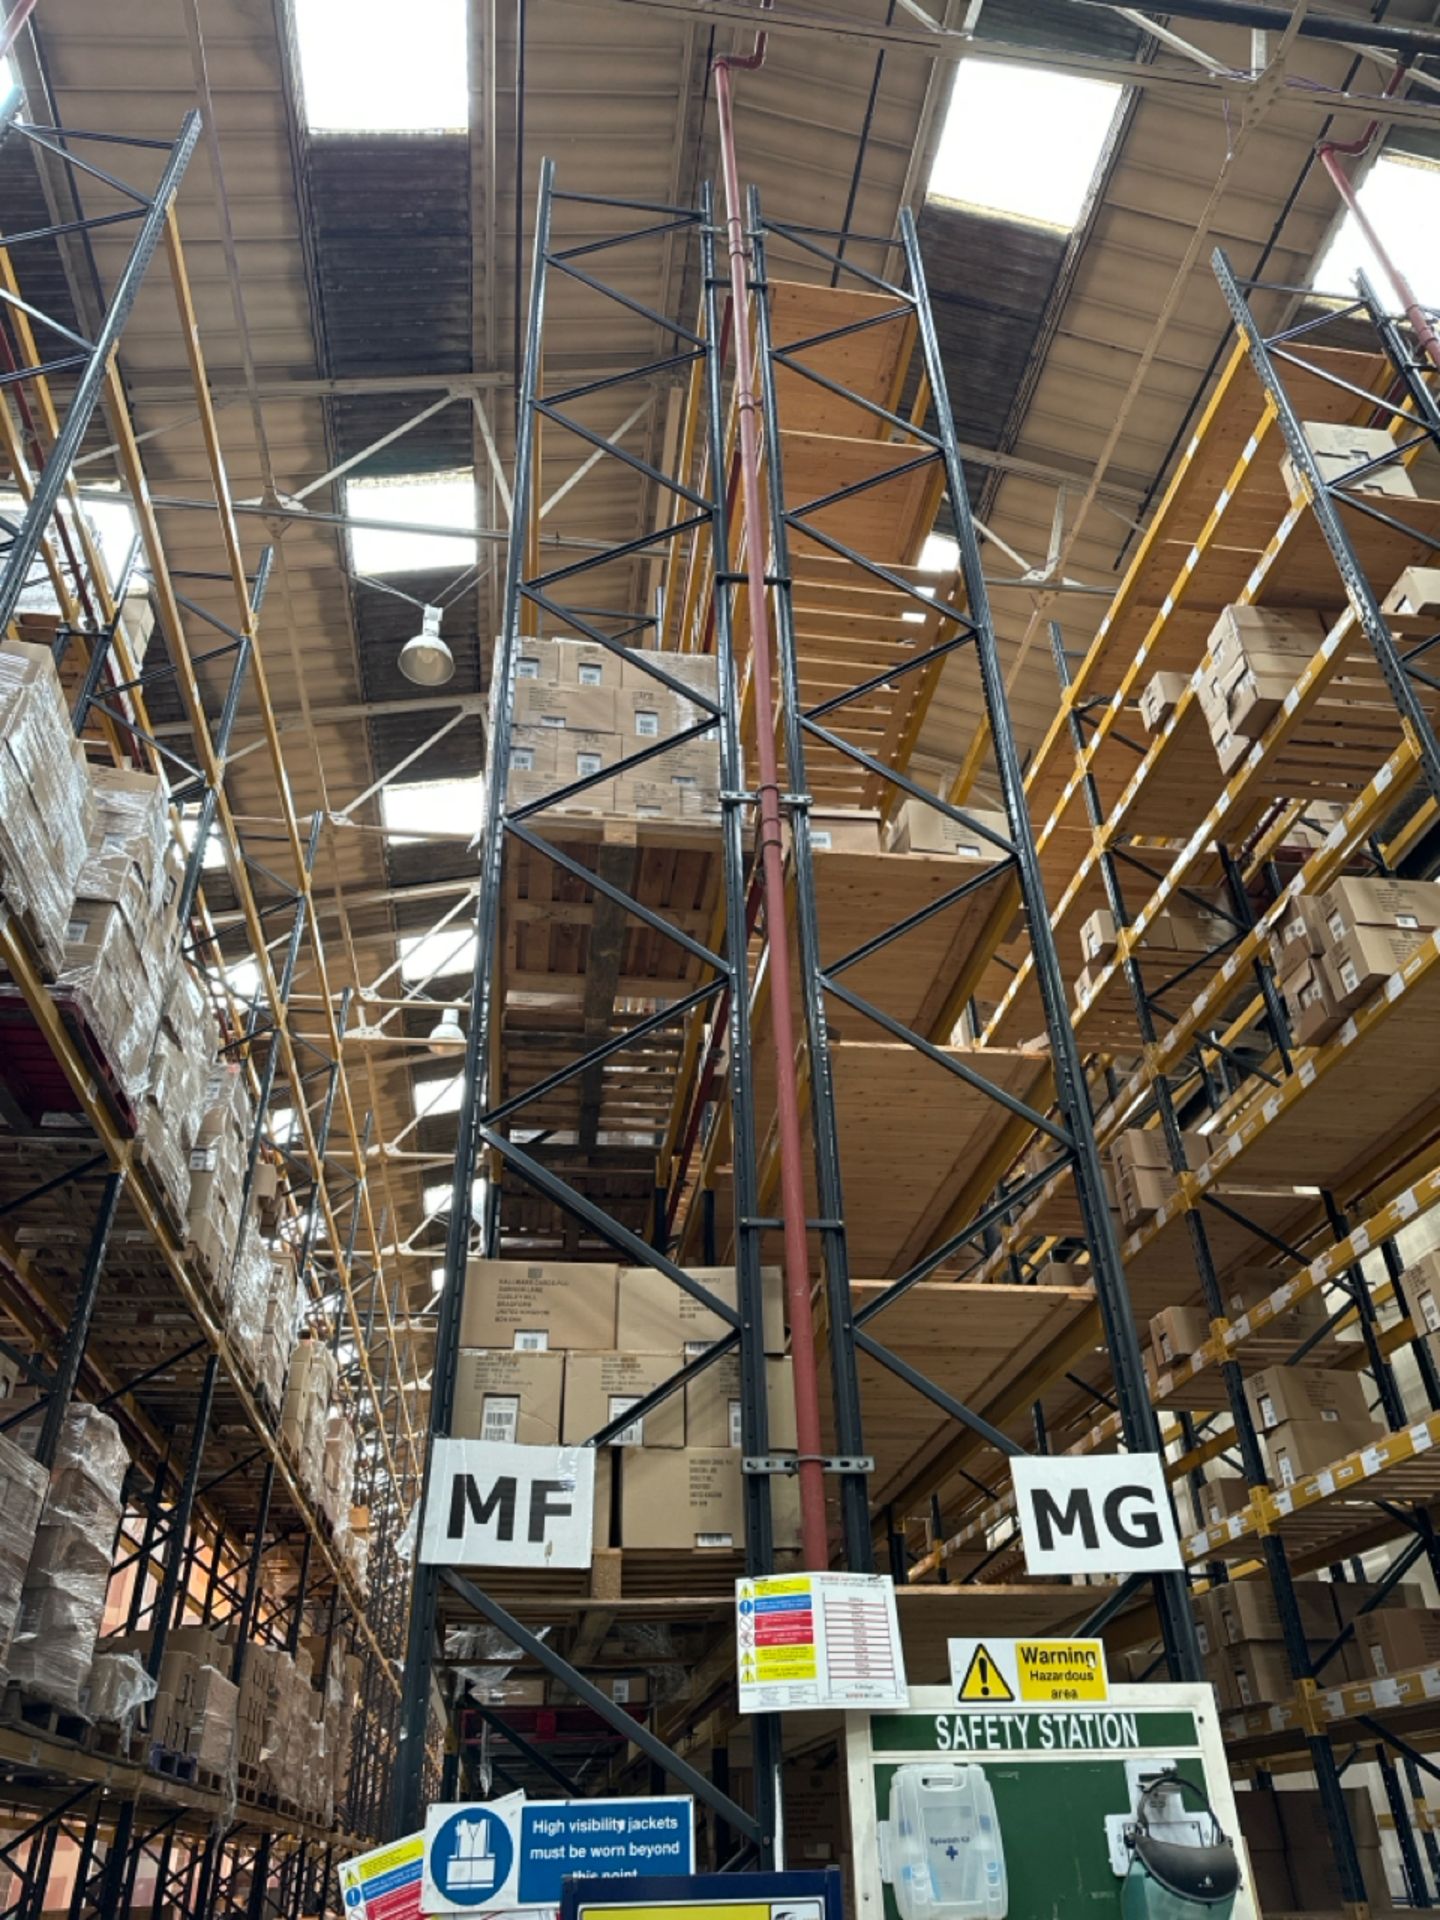 Run Of 46 Bays Of Back To Back Boltless Industrial Pallet Racking - Image 2 of 12